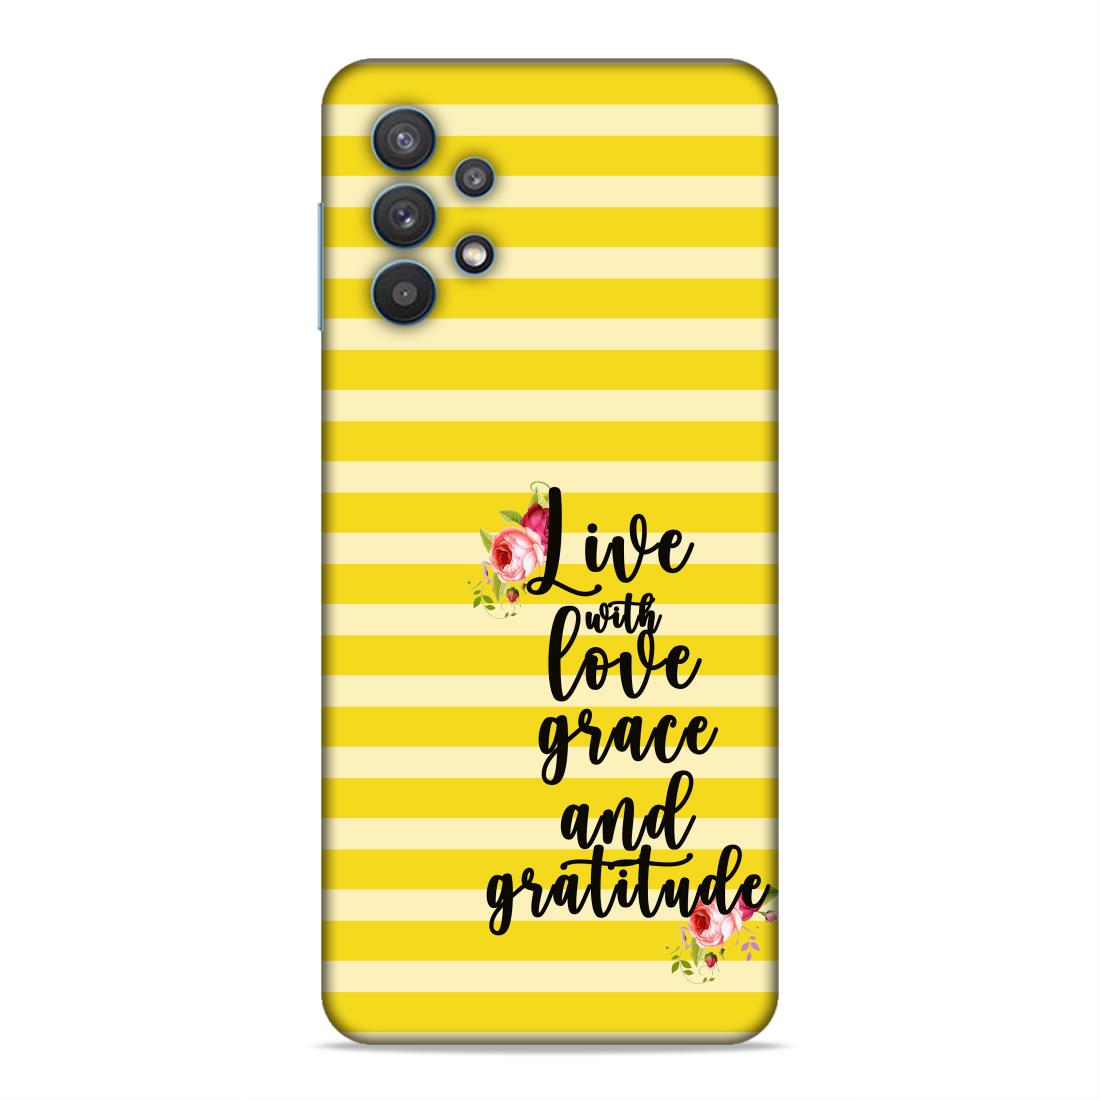 Live with Love Grace and Gratitude Hard Back Case For Samsung Galaxy A32 5G / M32 5G